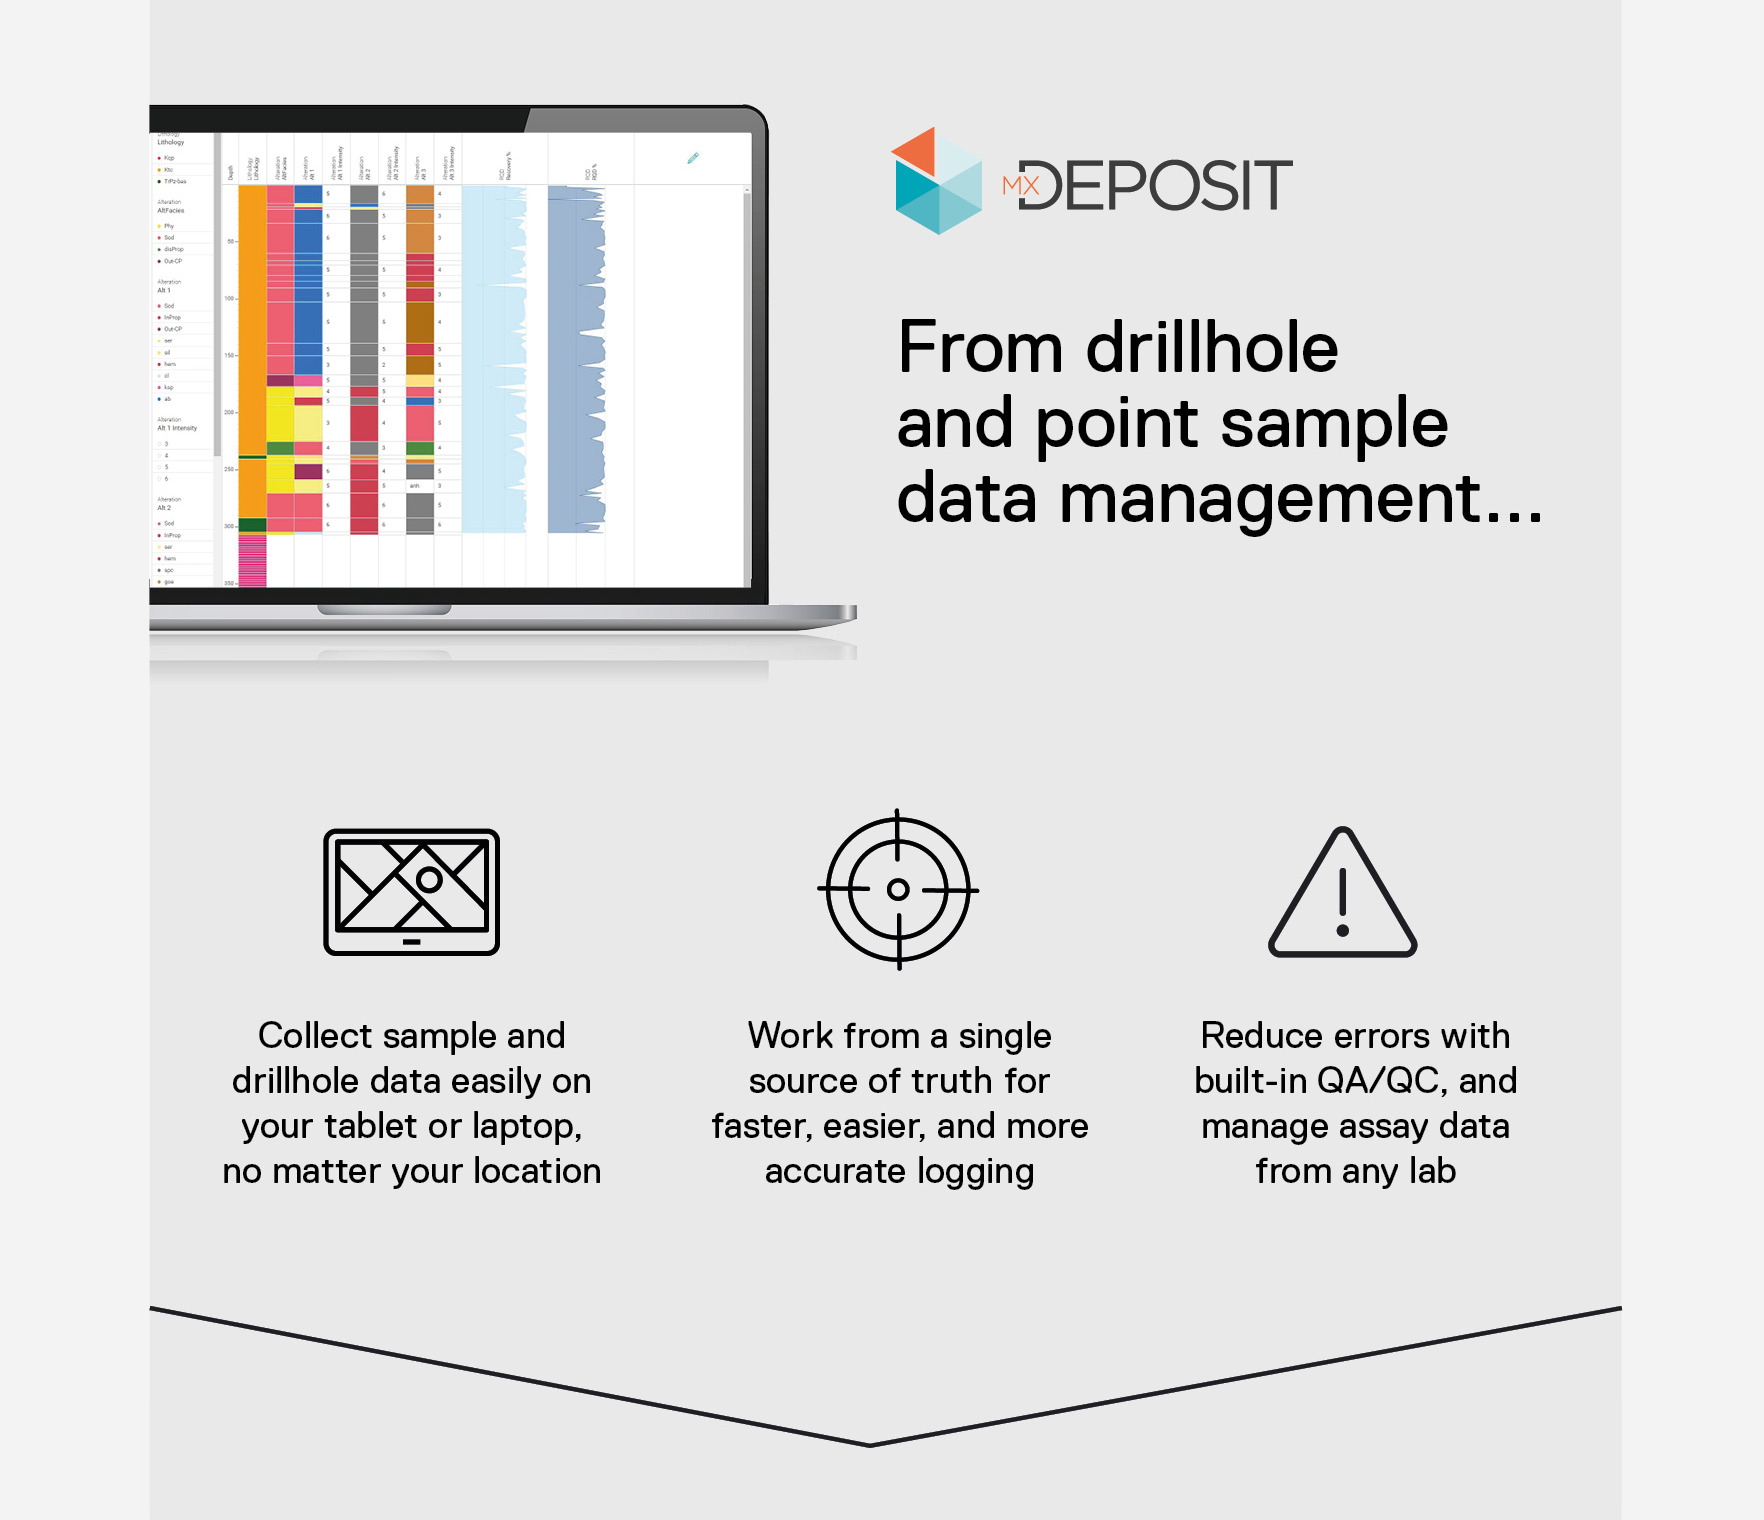 Infographic showing benefits of MX Deposit Drilling Data Management